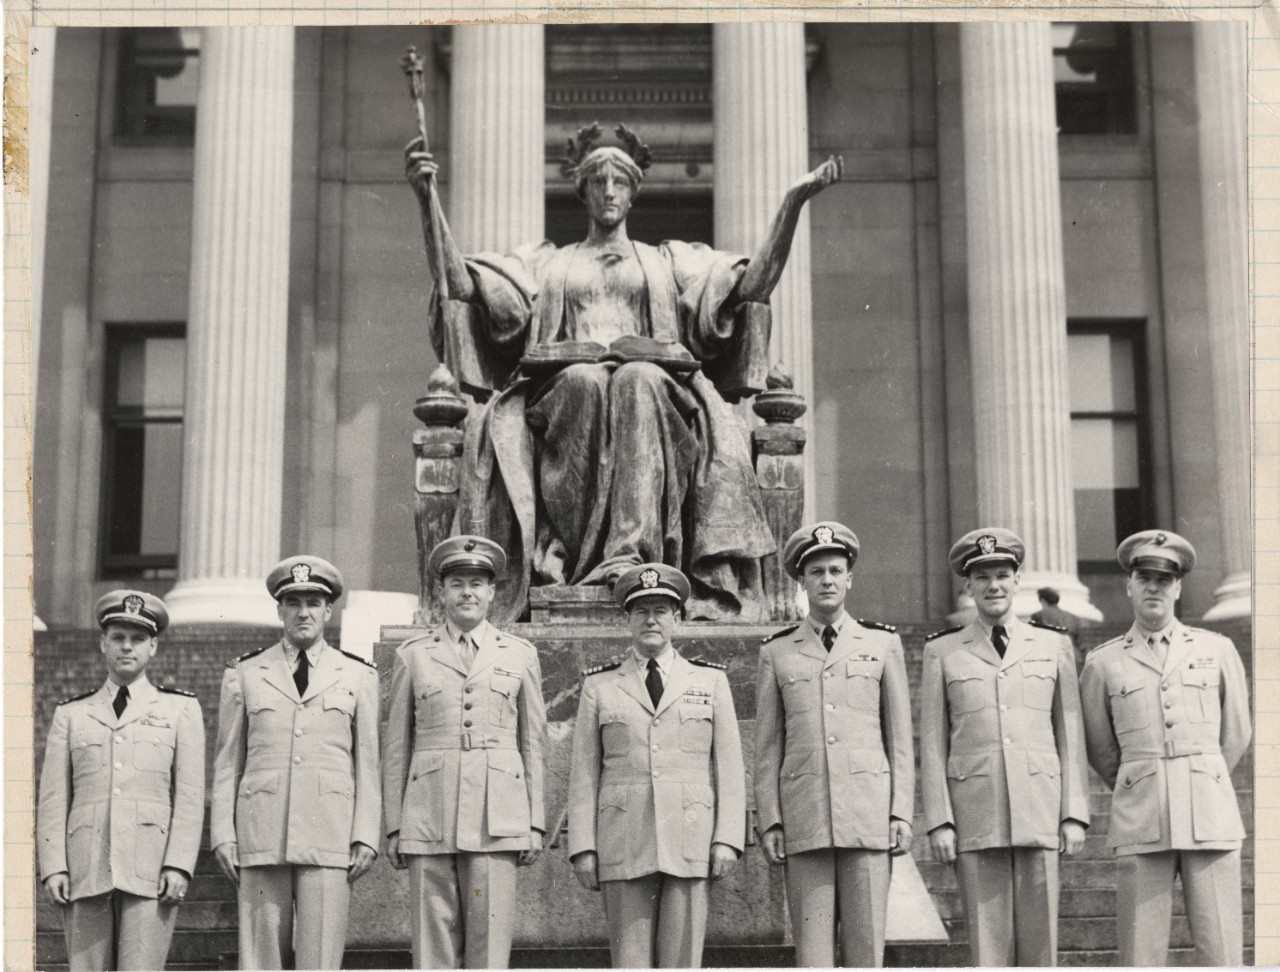 Seven NROTC officers posing in front of Alma Mater statue, 1953 Columbian.